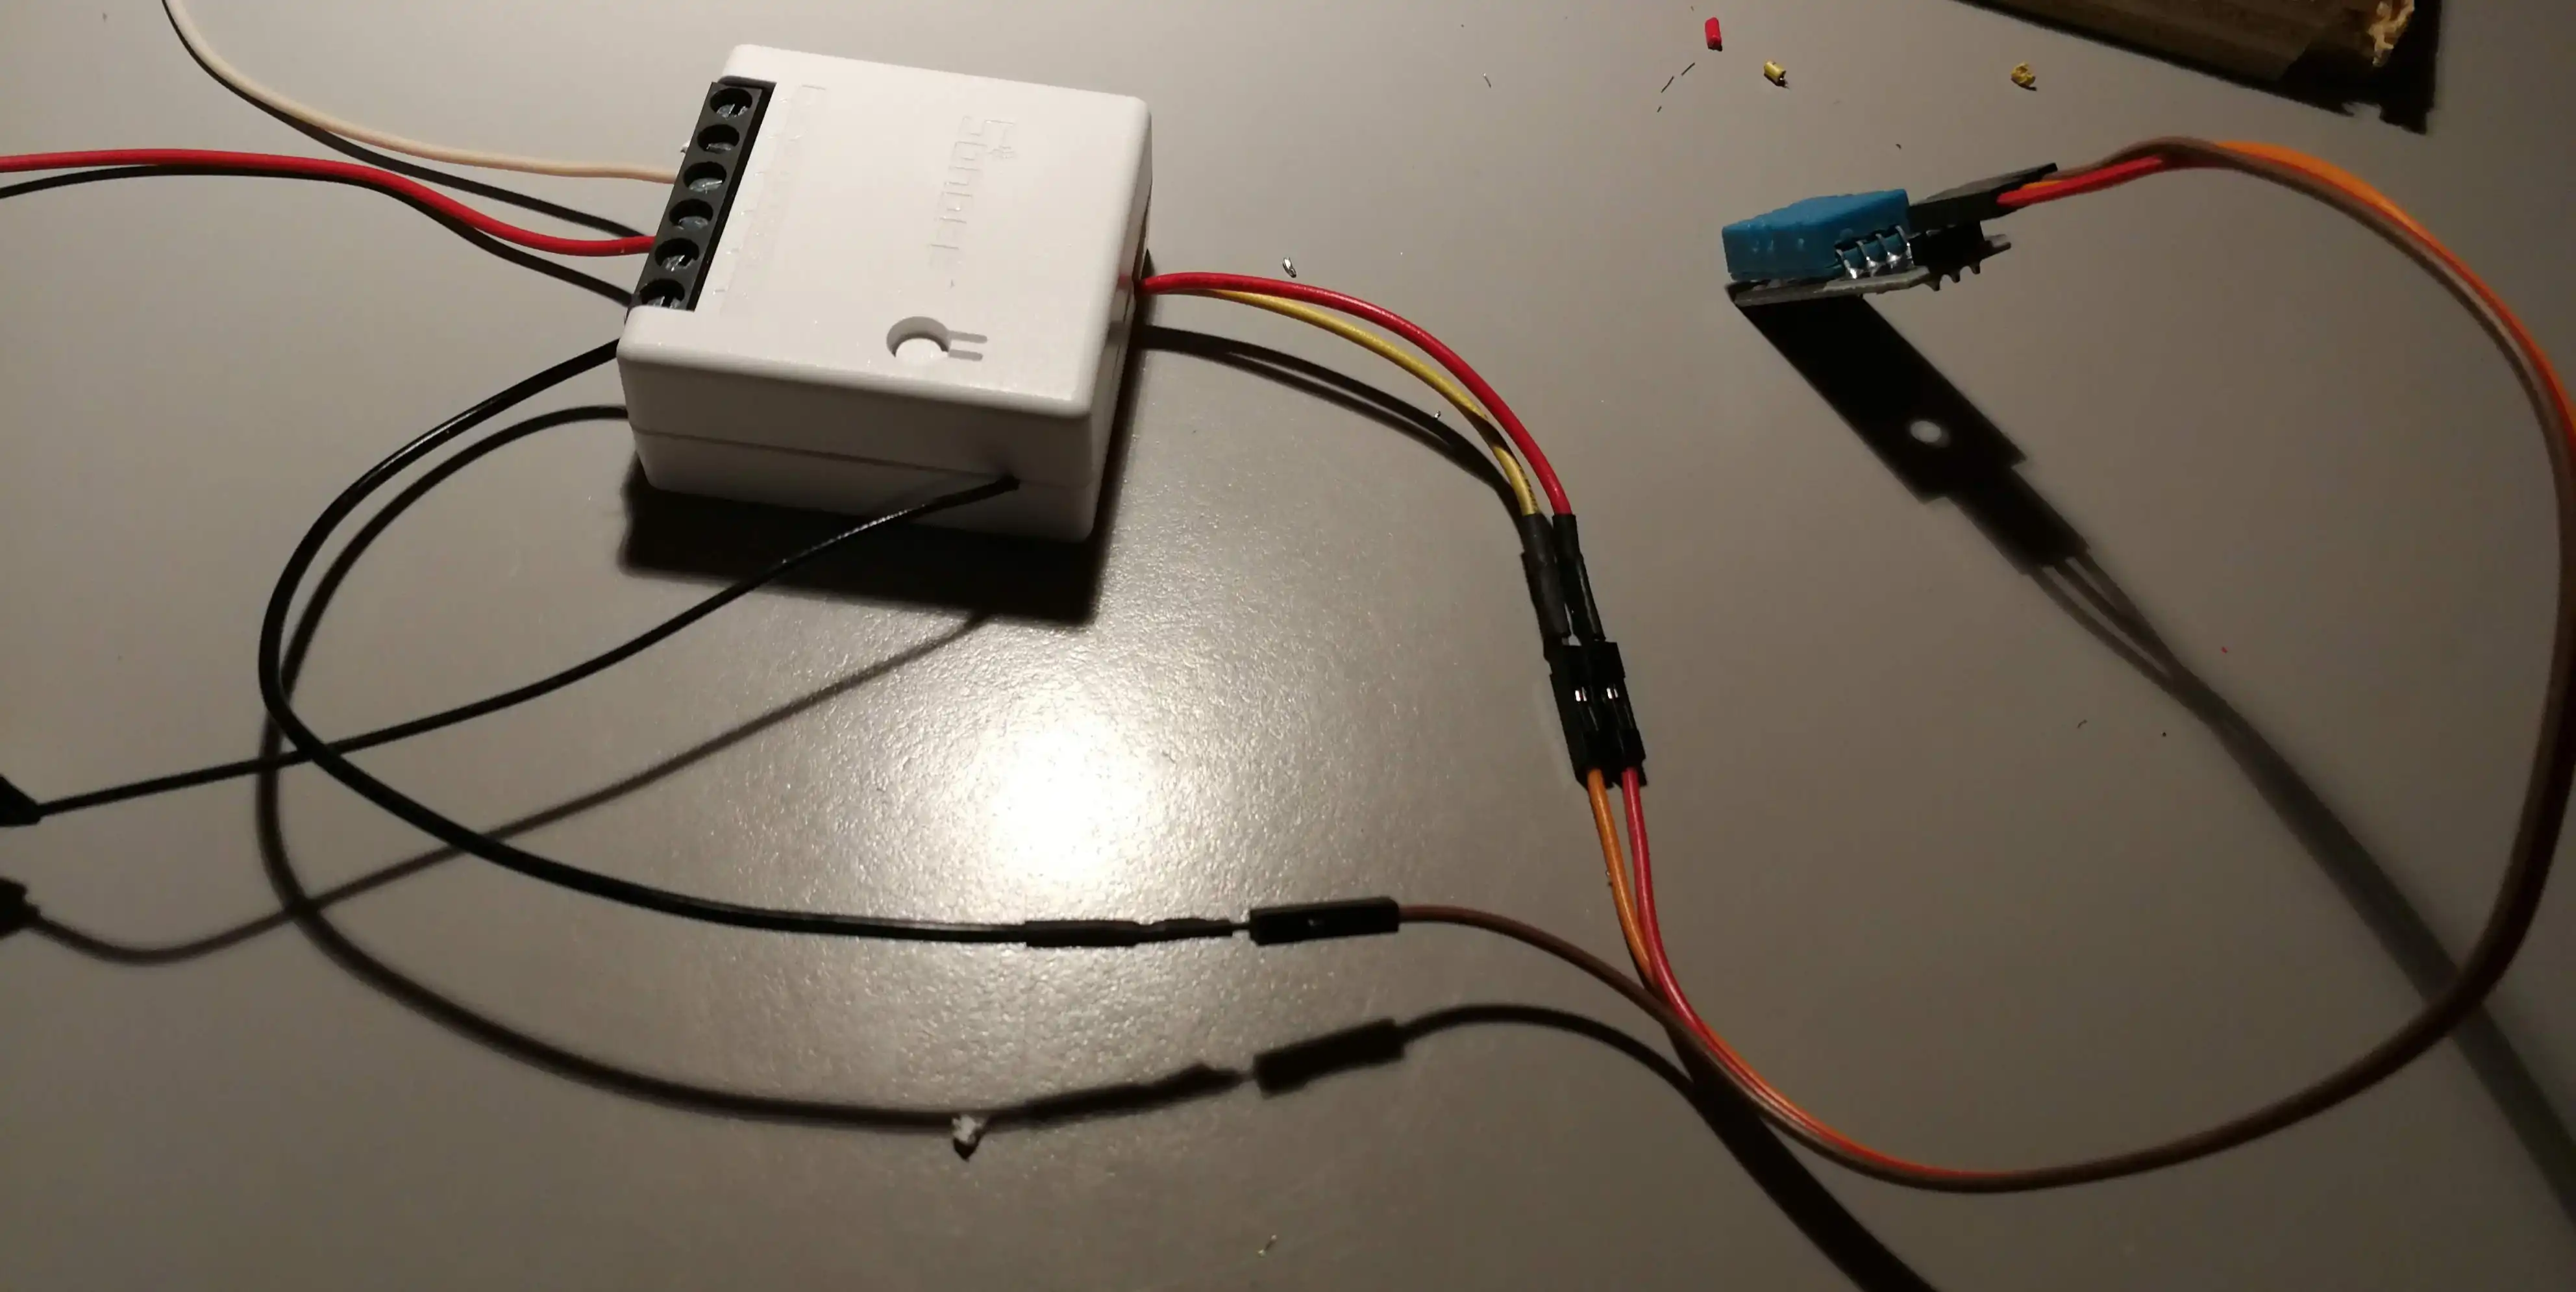 Home Automation System - Temperature sensor with SONOFF mini - Two sensors